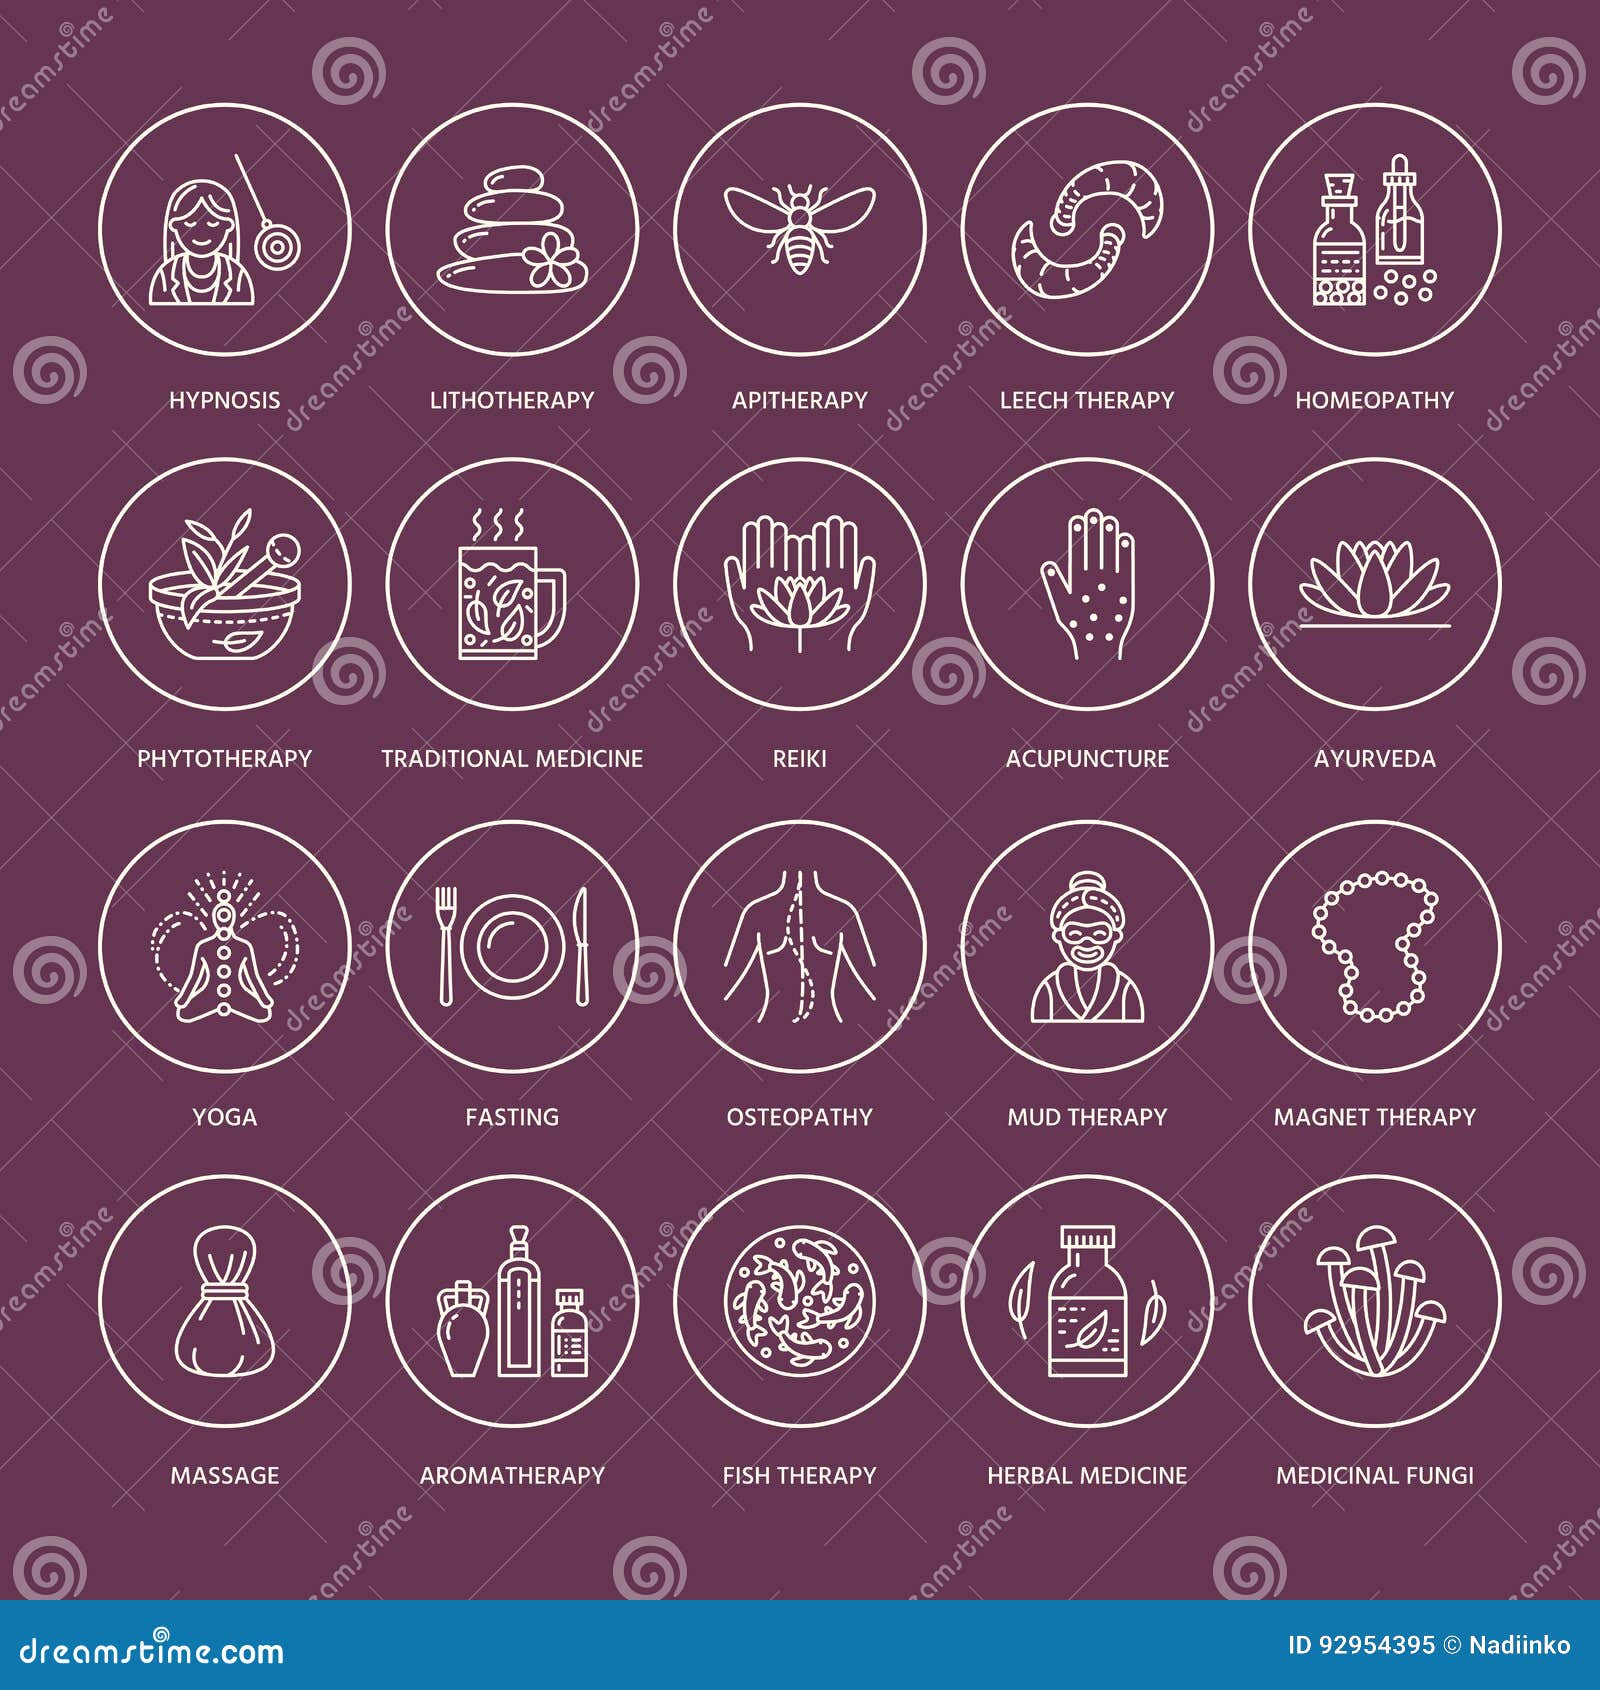 alternative medicine line icons. naturopathy, traditional treatment, homeopathy, osteopathy, herbal fish and leech